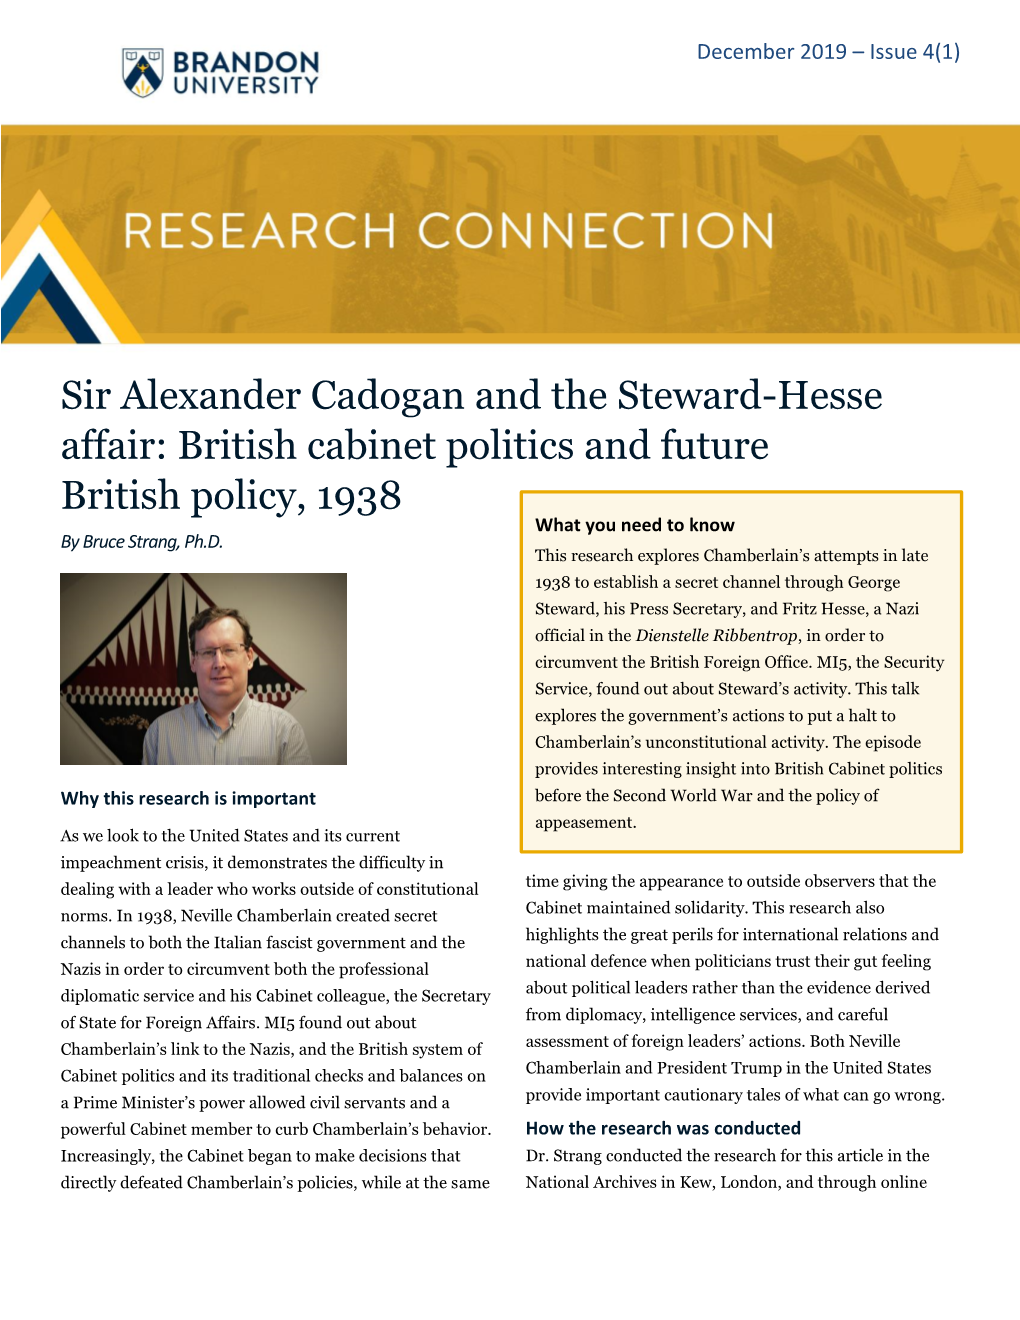 Sir Alexander Cadogan and the Steward-Hesse Affair: British Cabinet Politics and Future British Policy, 1938 What You Need to Know by Bruce Strang, Ph.D